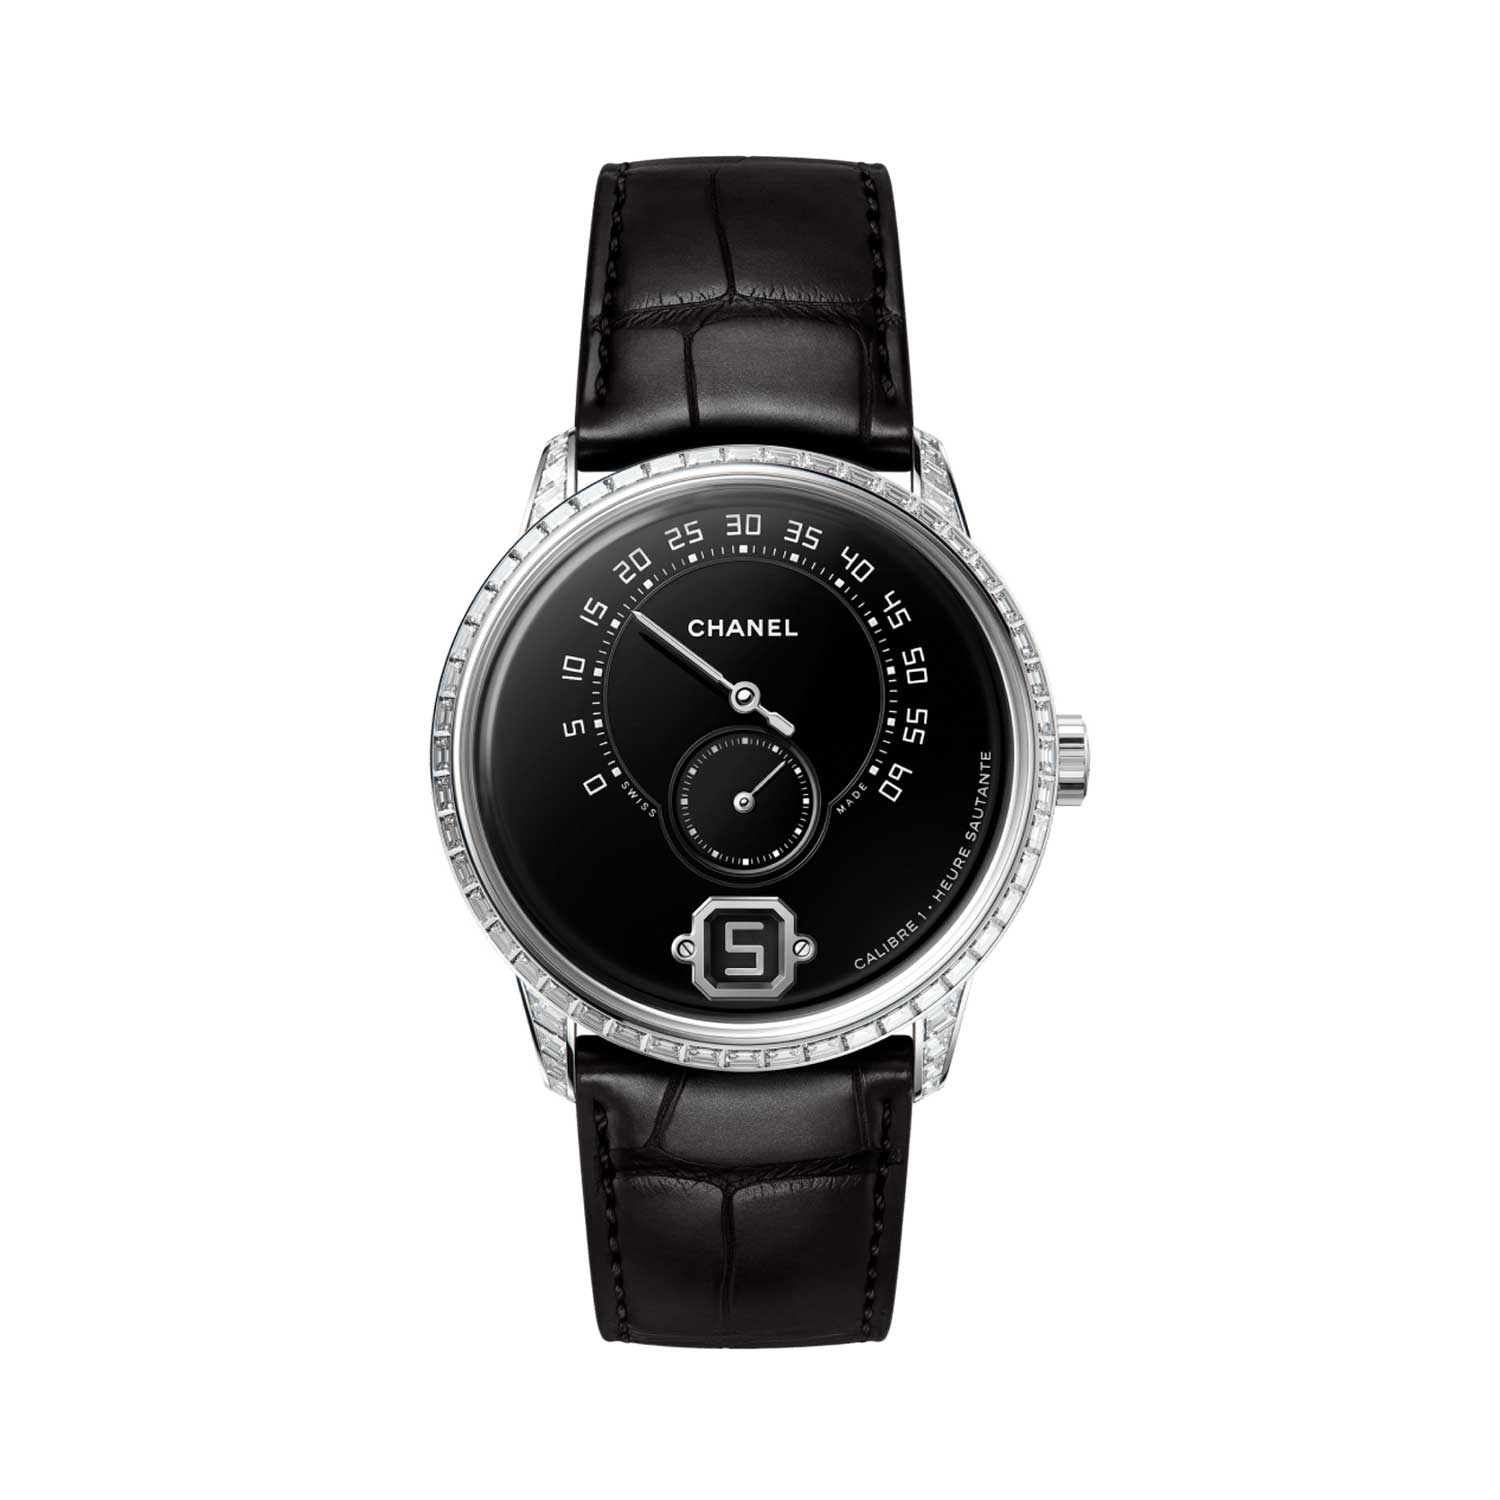 Monsieur de Chanel fitted with Calibre 1